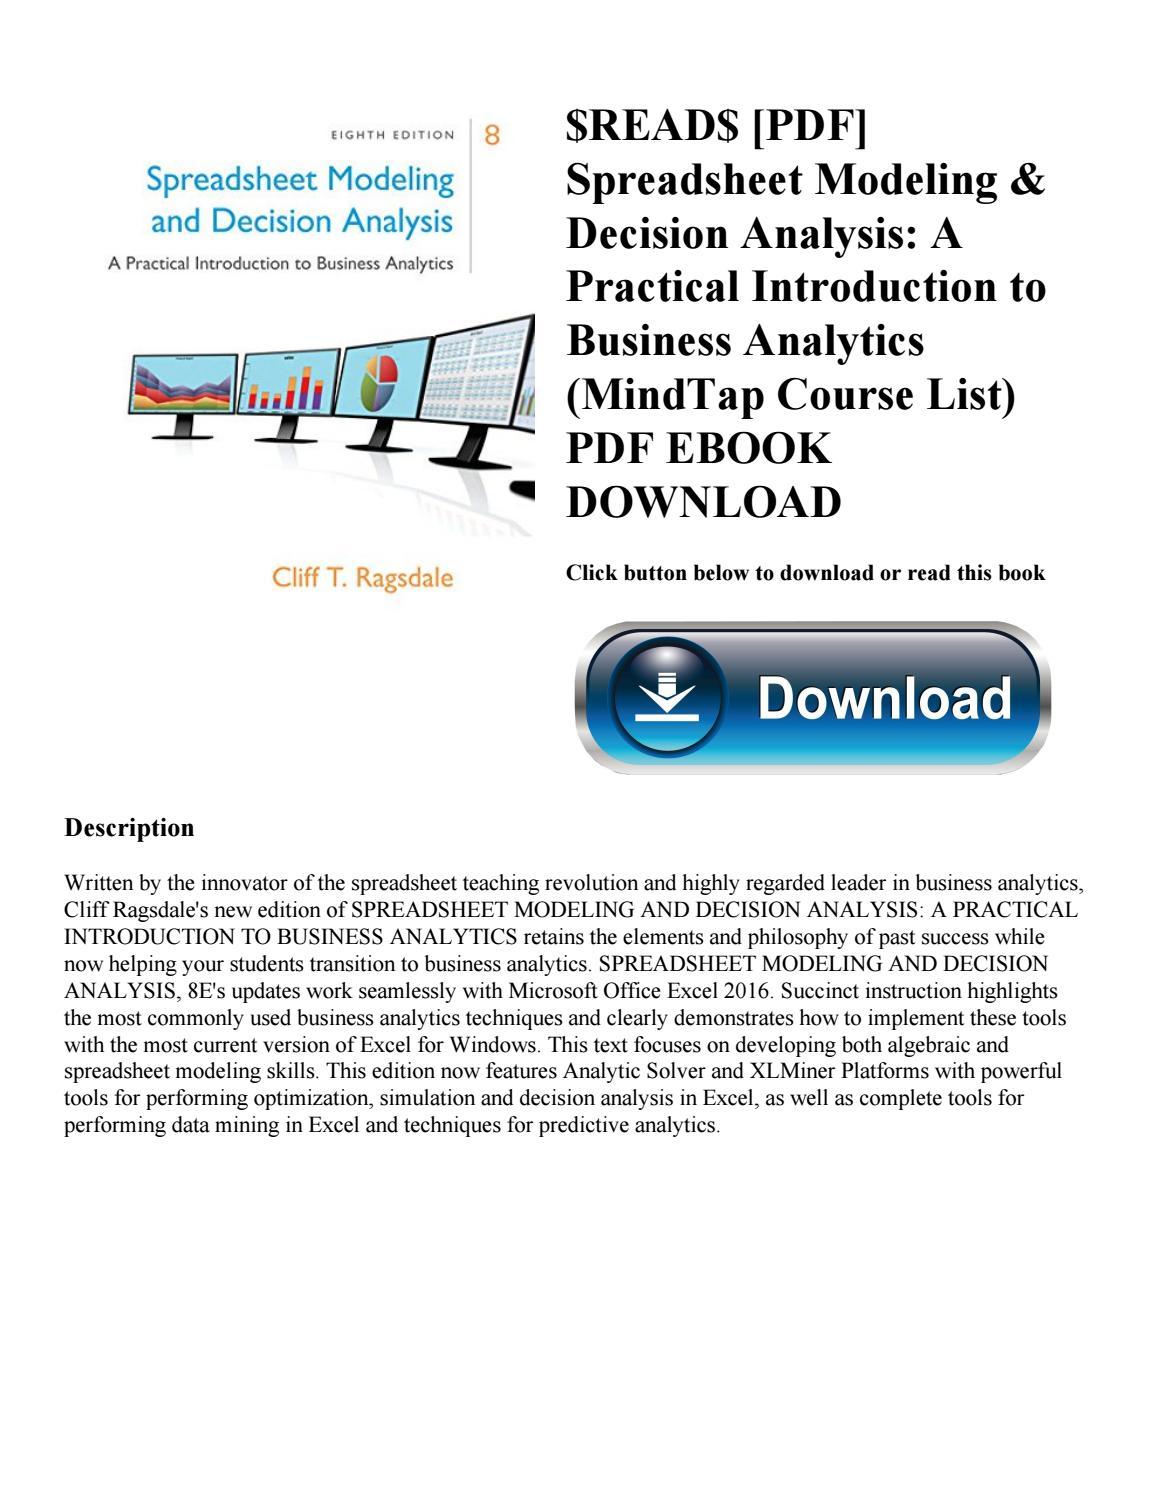 spreadsheet modeling and decision analysis pdf free download